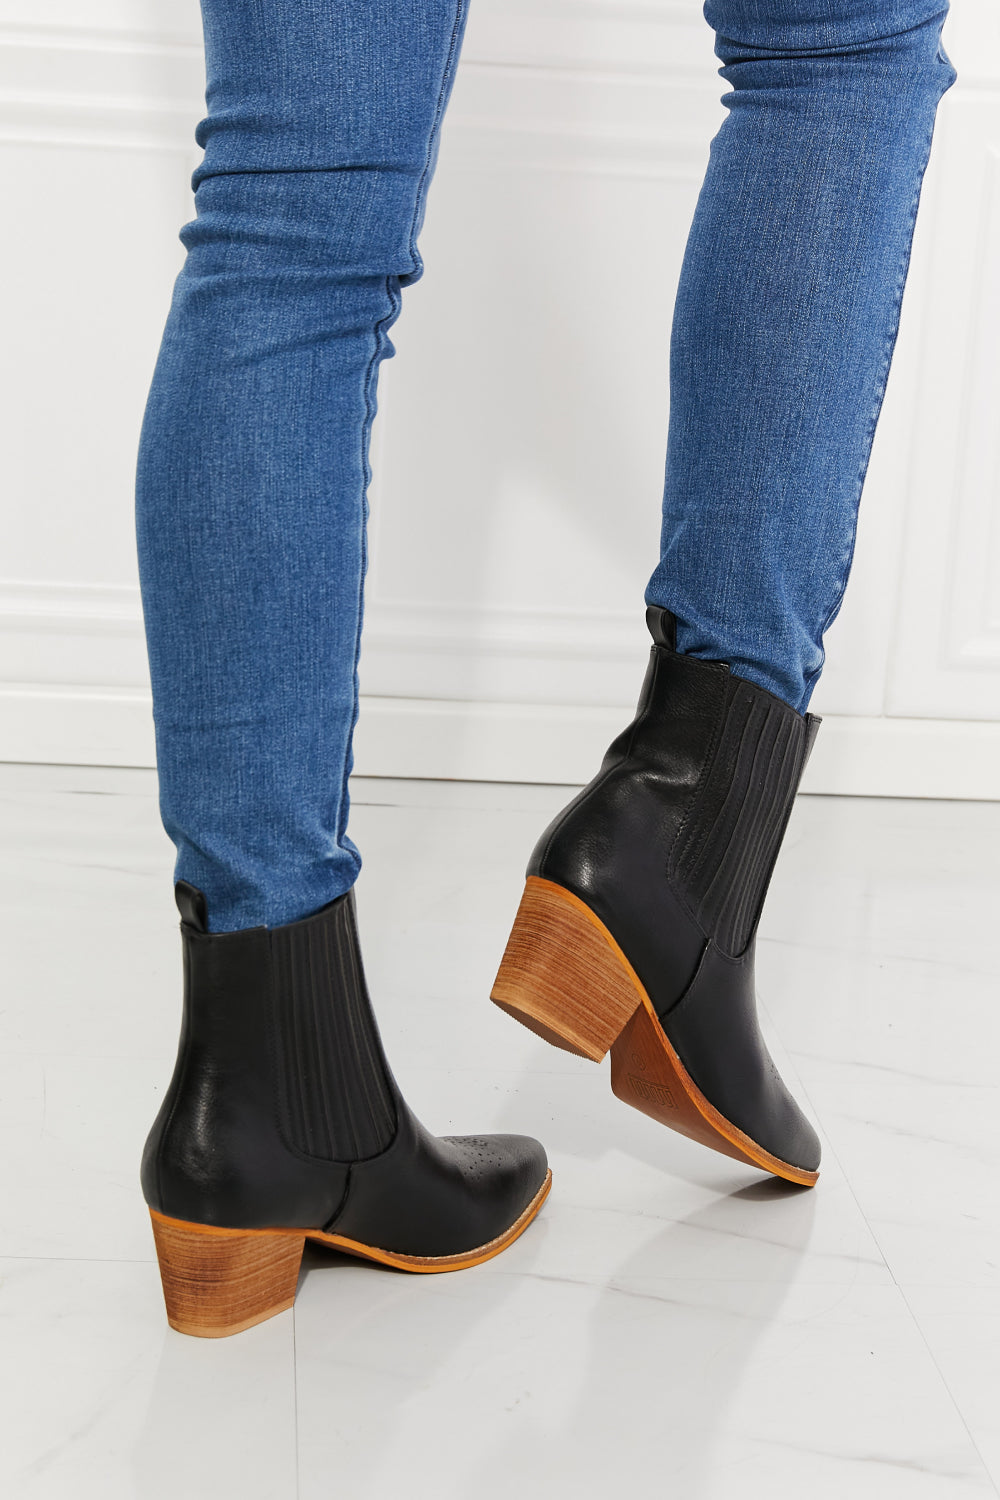 Dark Slate Gray MMShoes Love the Journey Stacked Heel Chelsea Boot in Black Sentient Beauty Fashions shoes